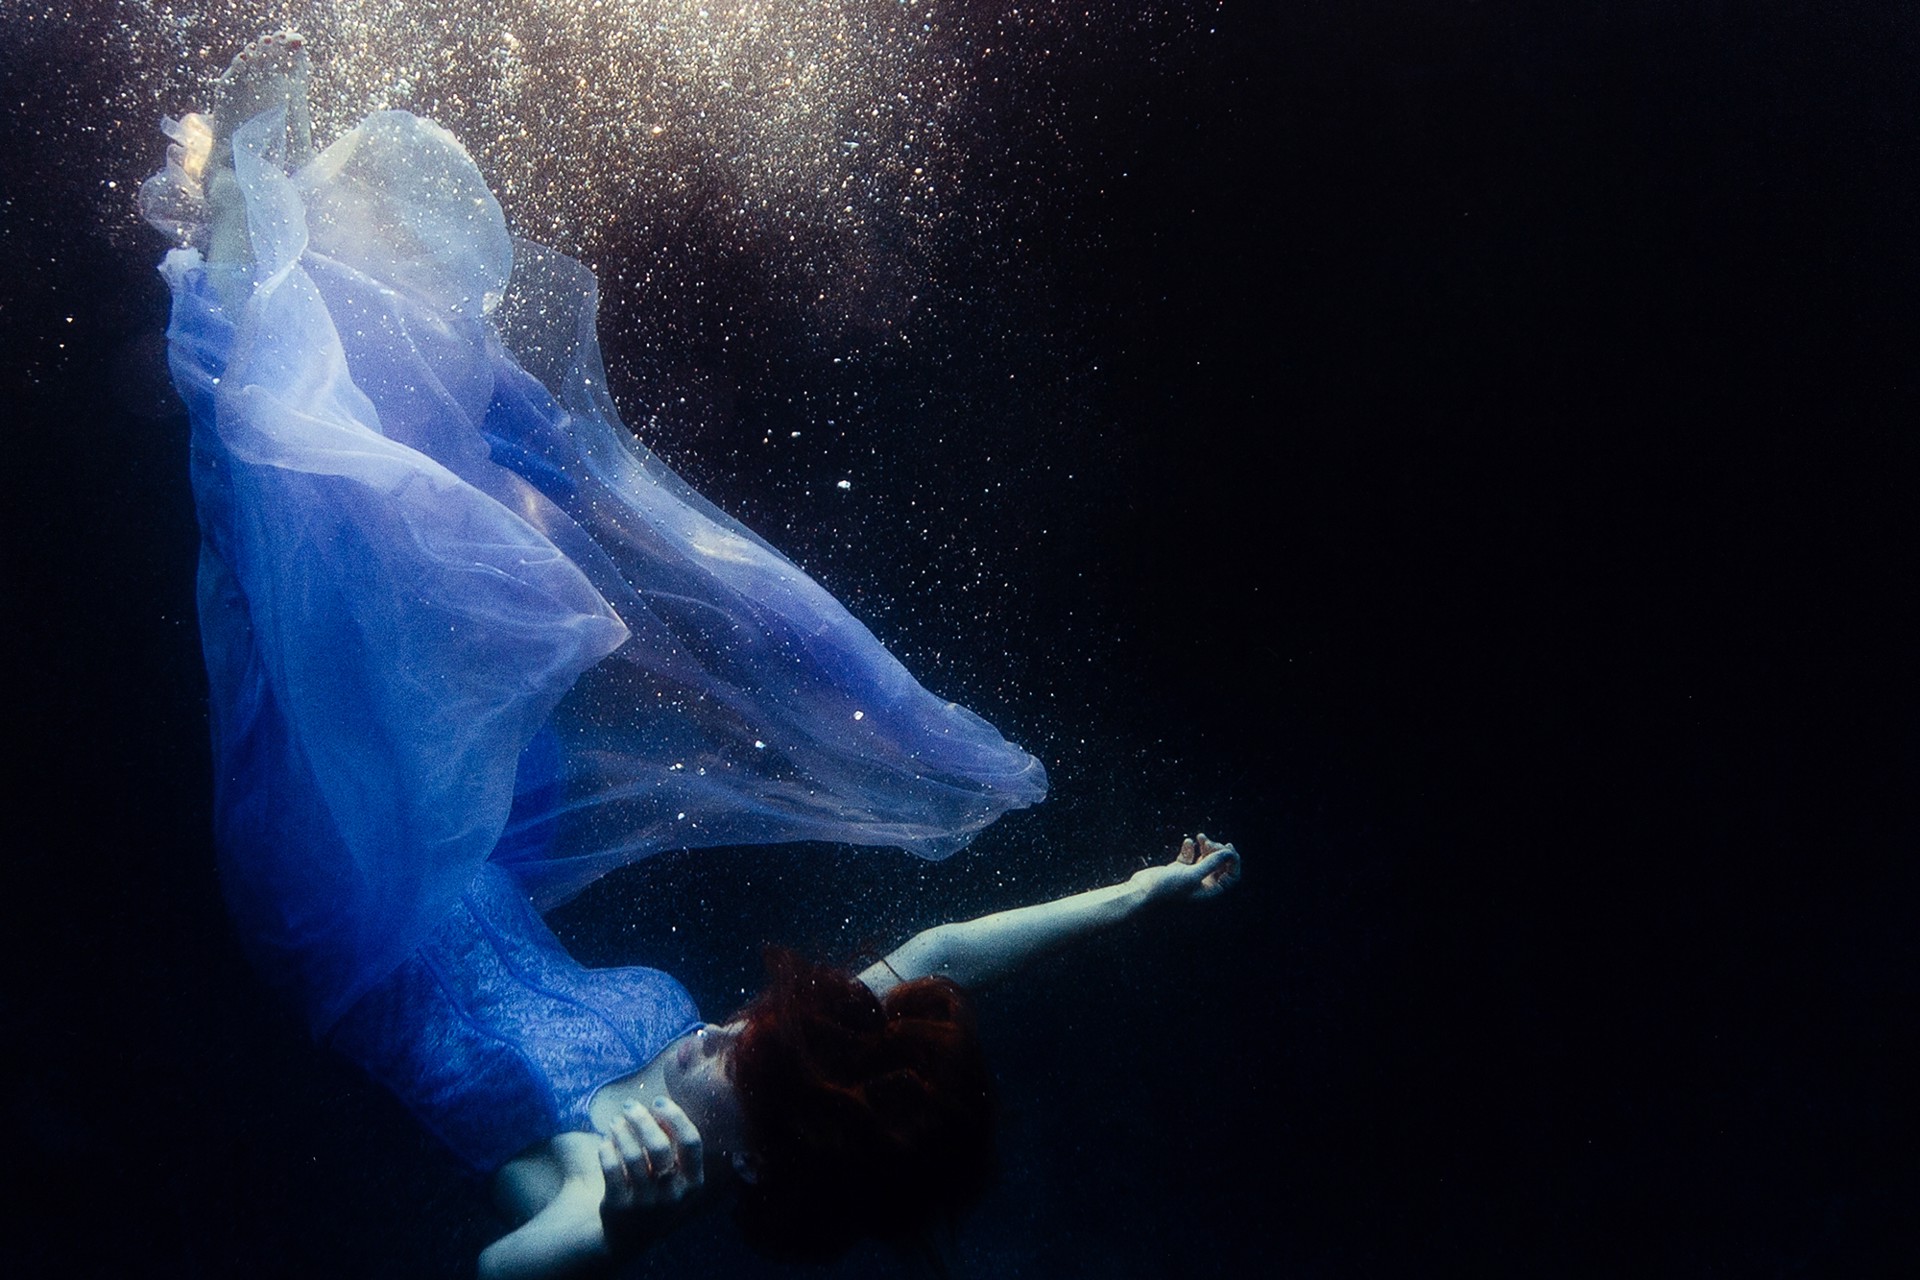 Submerged by Tyler Shields